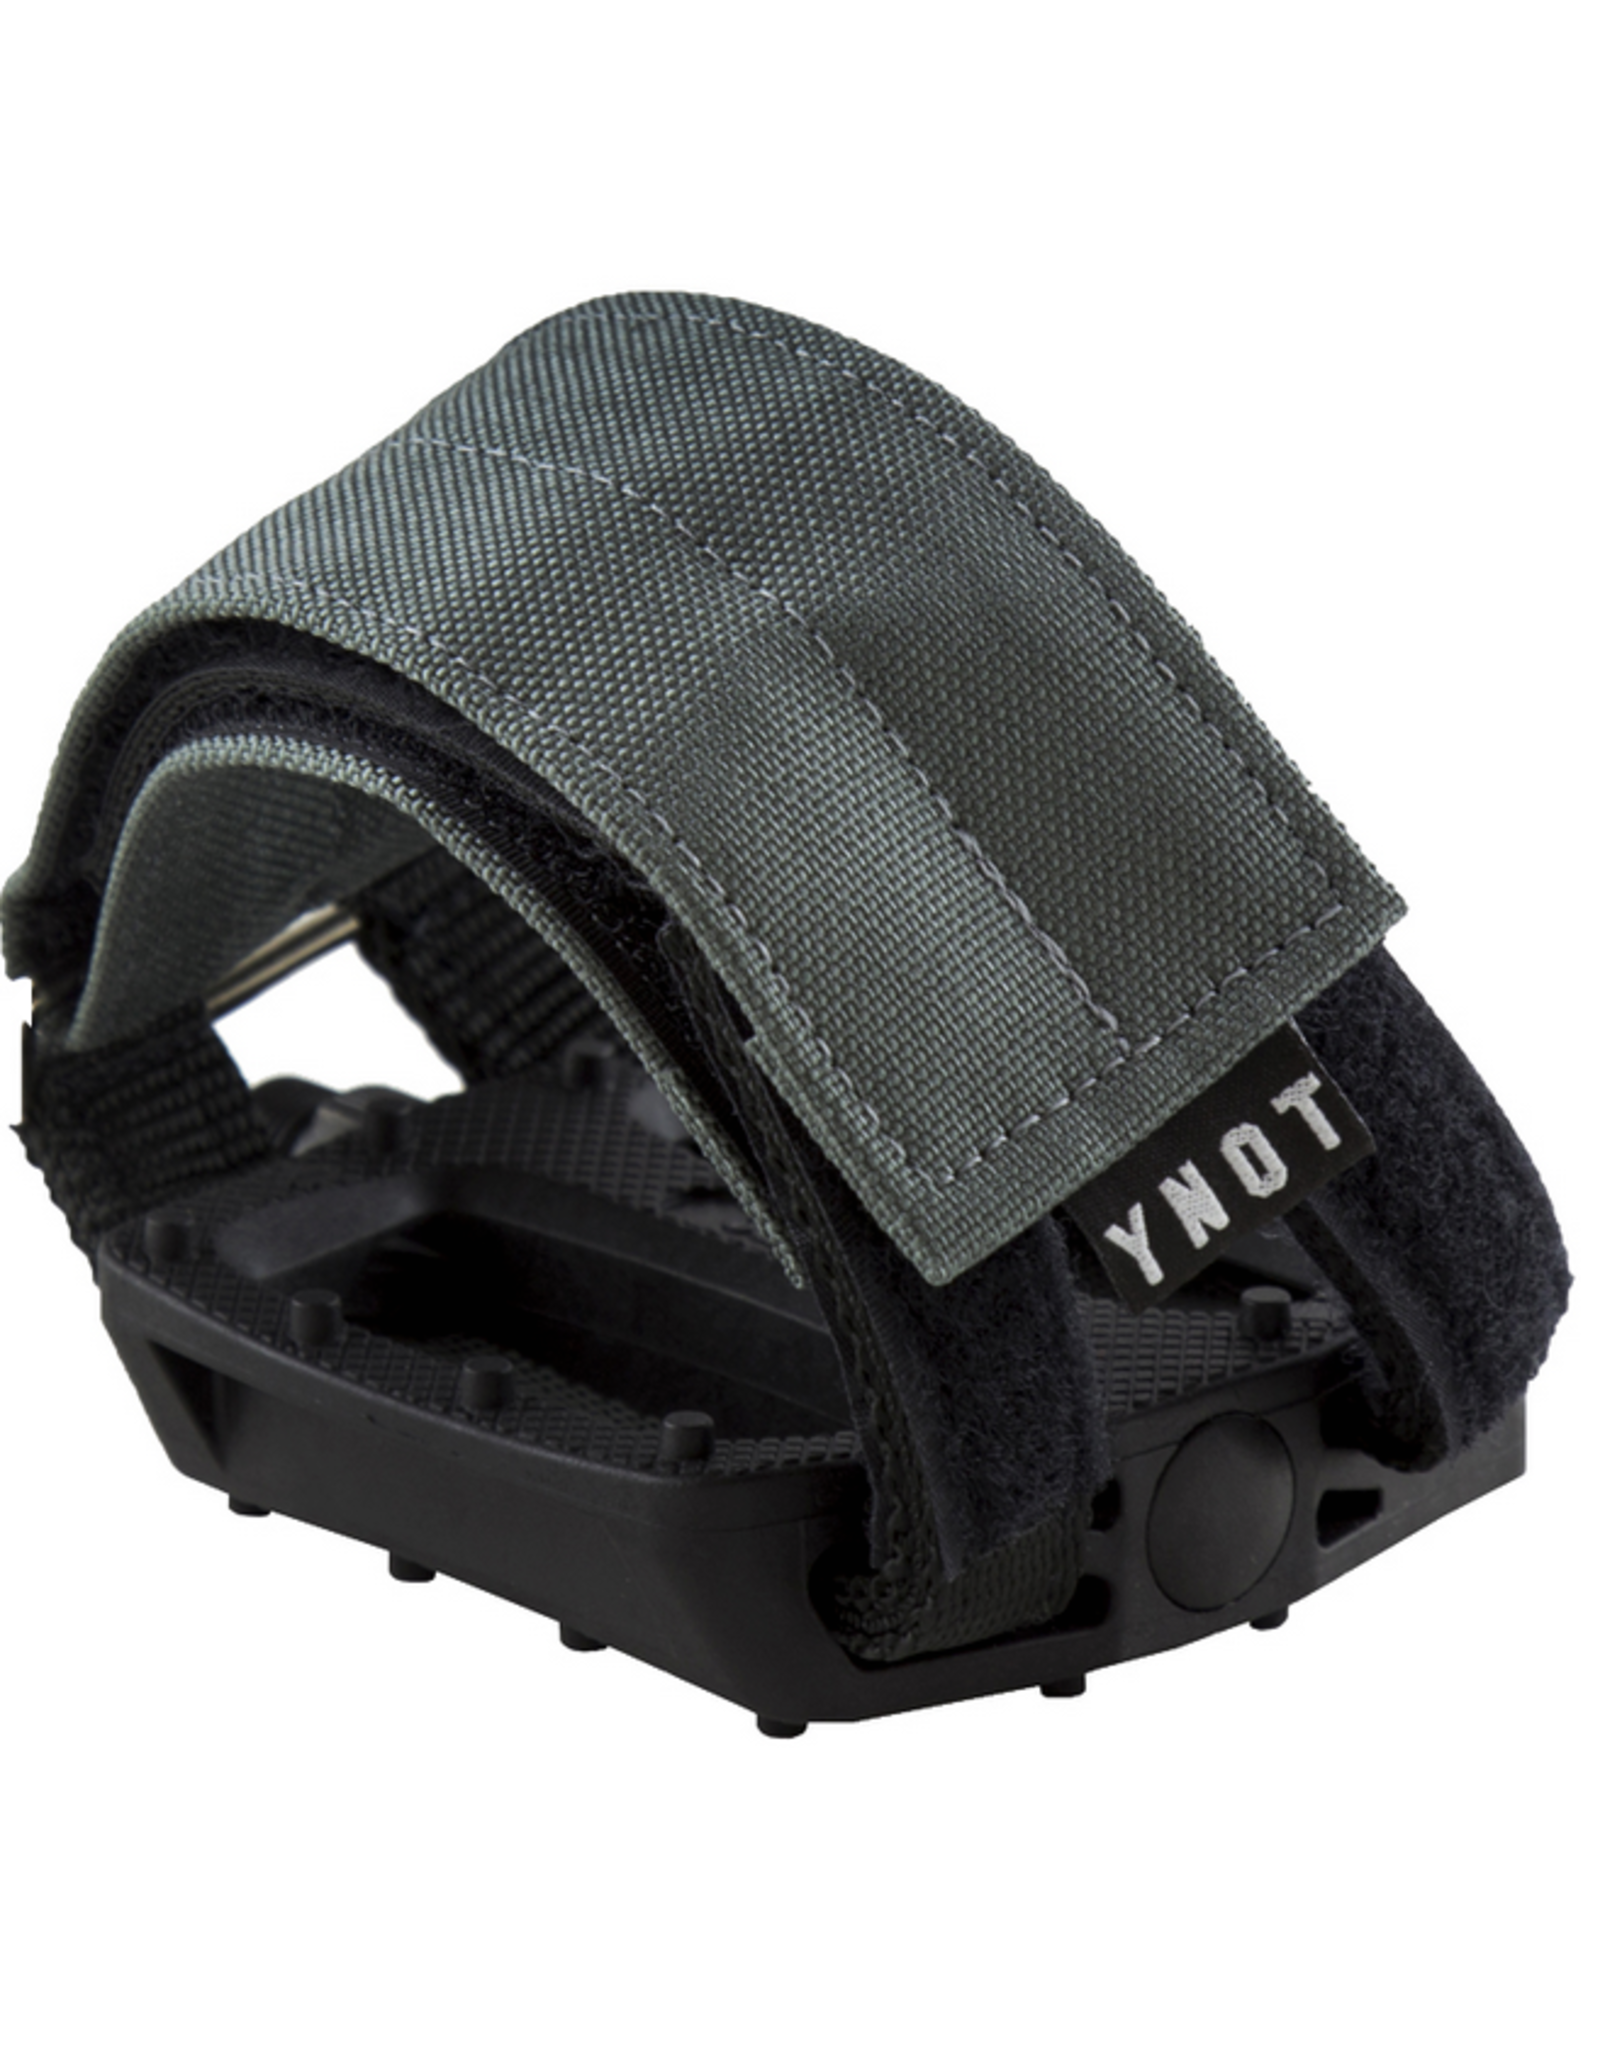 YNOT YNOT Pedal Straps, Cordura with Velcro